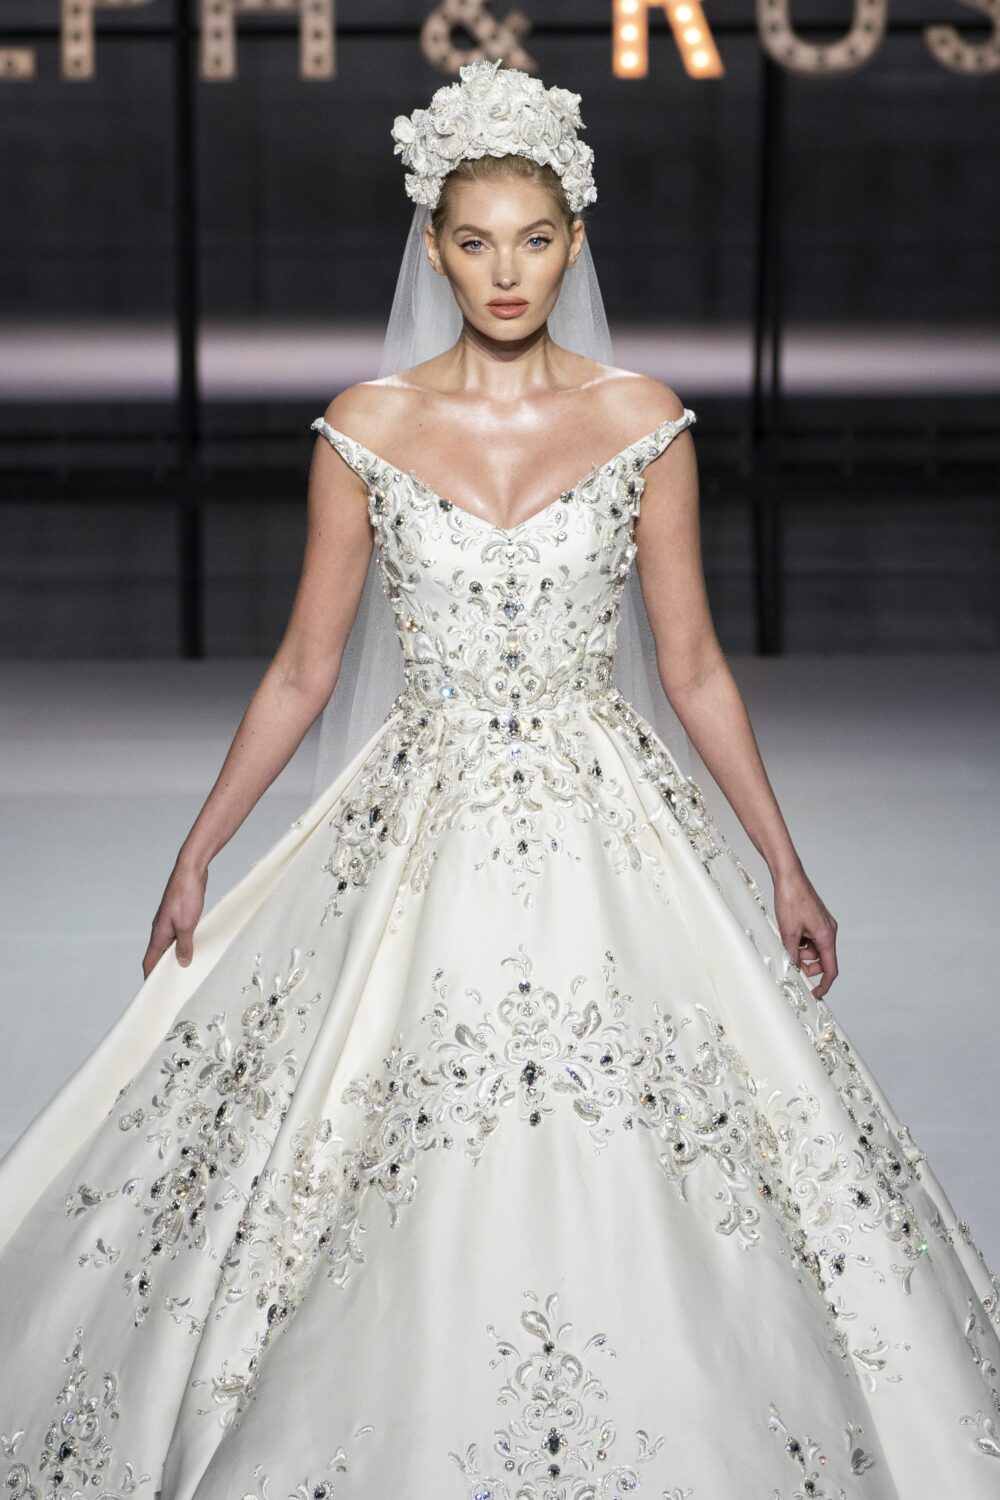 Best Wedding Dress Couture Check it out now | weddingdecorate3